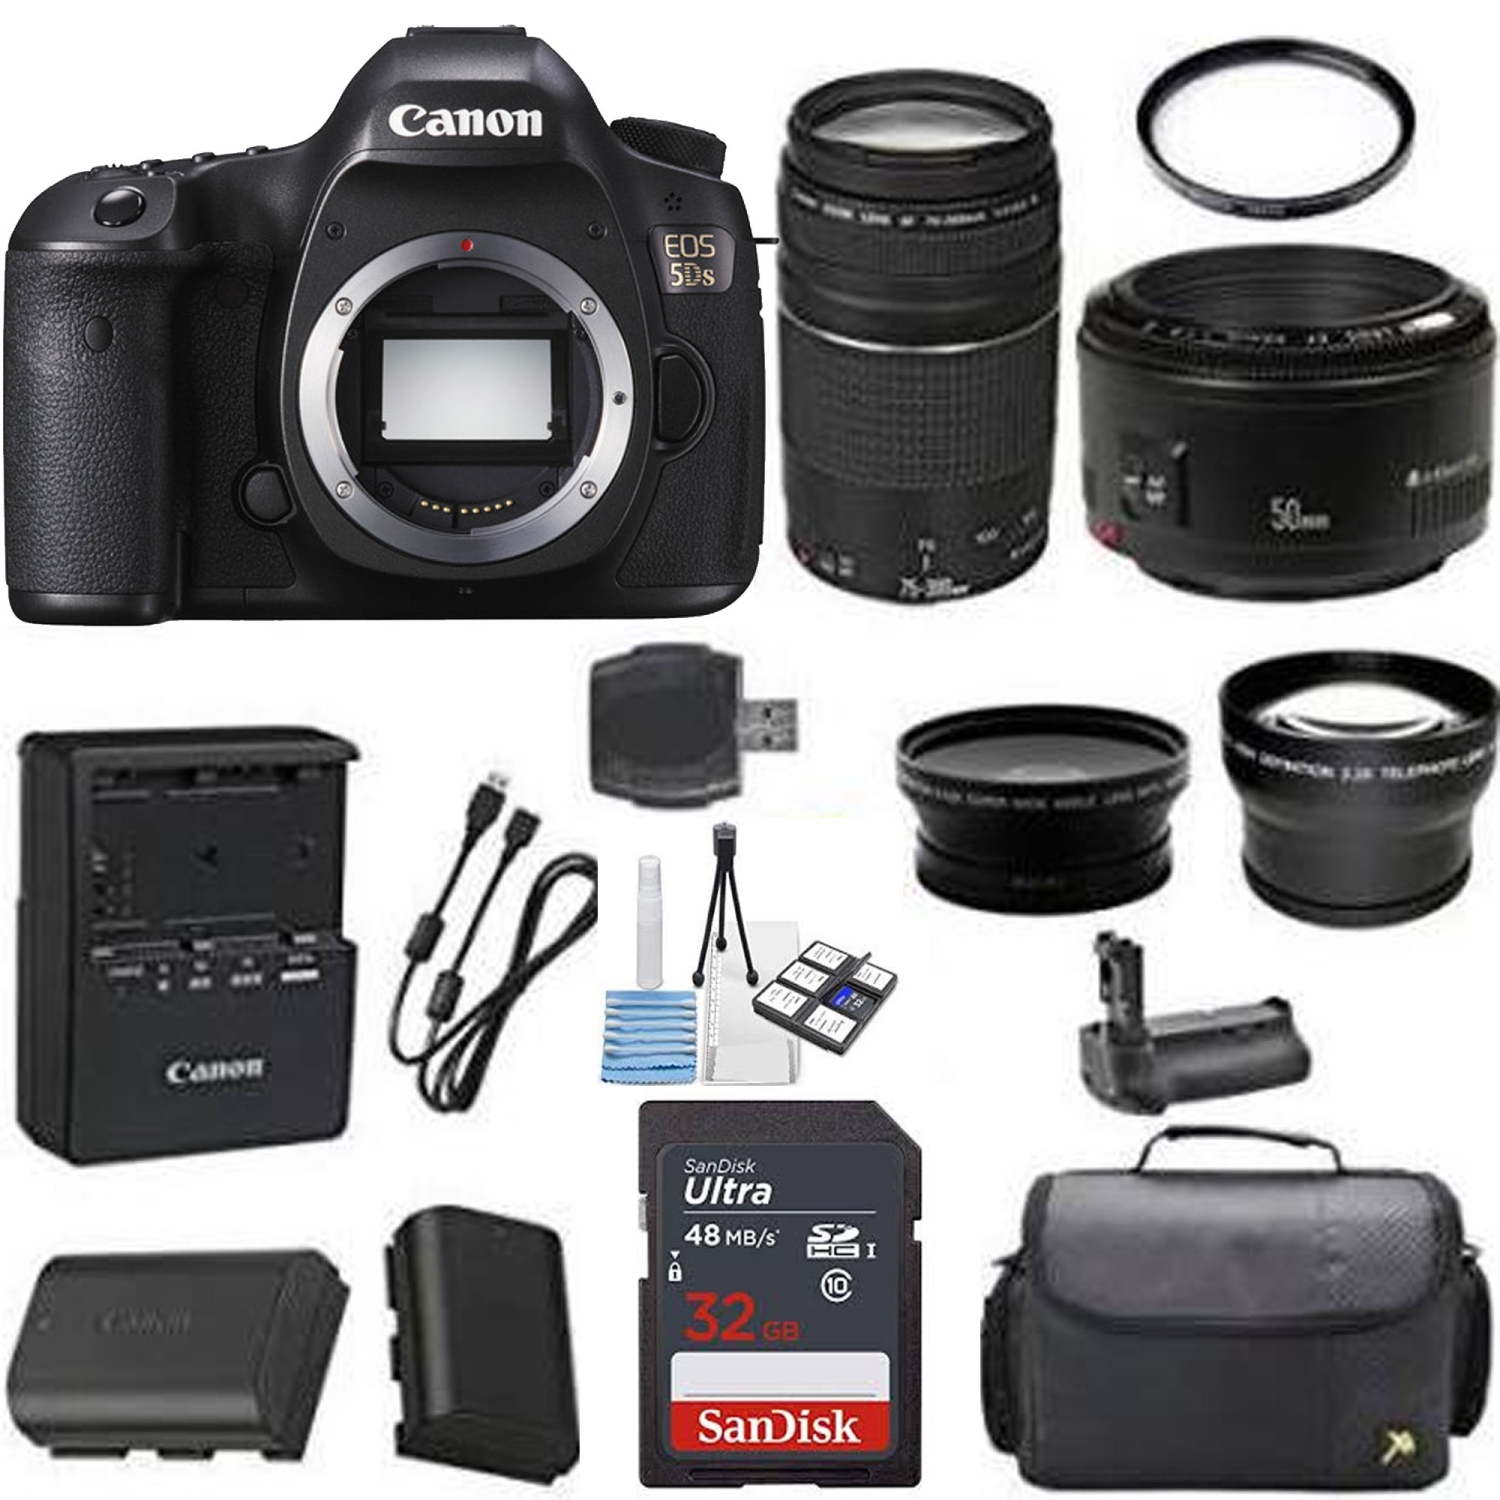 Canon EOS 5DS Digital SLR Bundle with Canon 50mm f/1.8 II Lens | Canon 75-300mm III Lens + Deluxe Camera Case + U.V. Filter - US Version w/ Seller Warranty